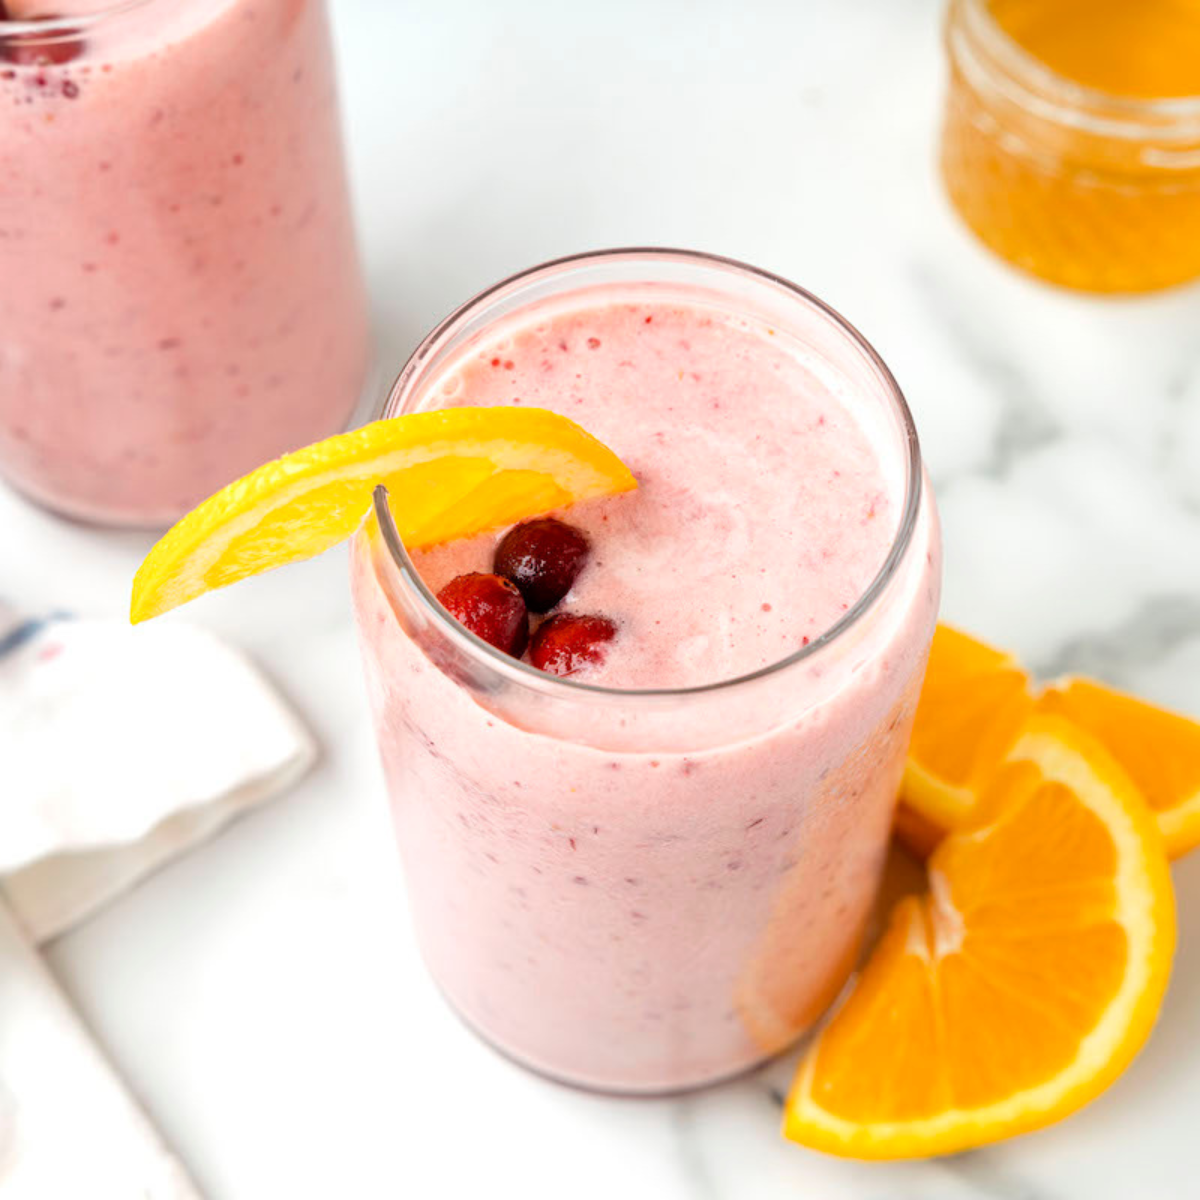 two glasses of cranberry smoothie with cranberry and orange garnishes.